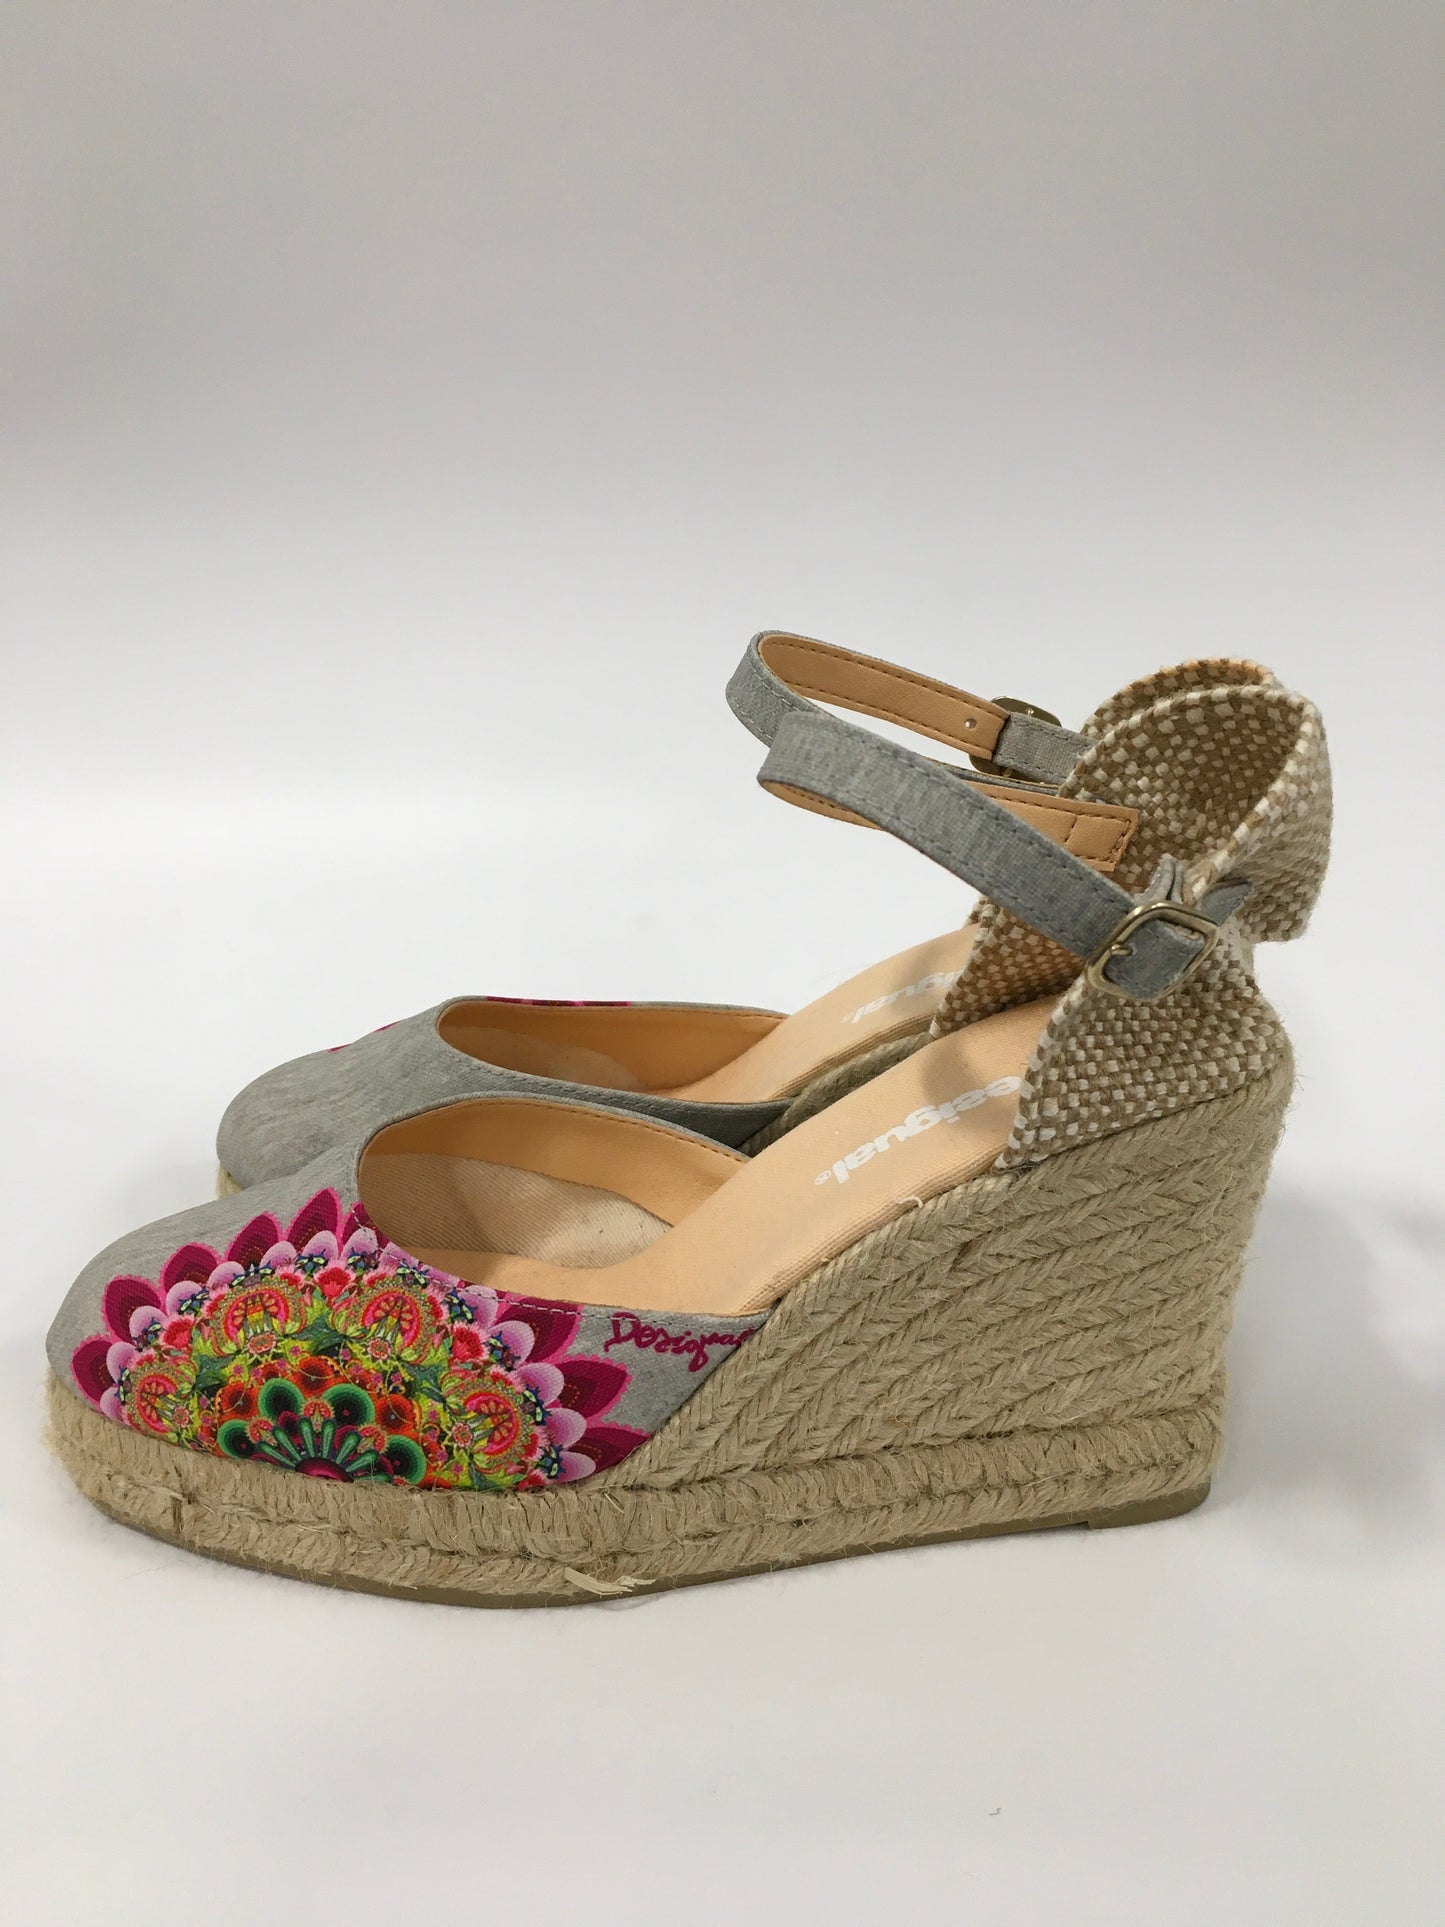 Shoes Heels Wedge By Desigual  Size: 10